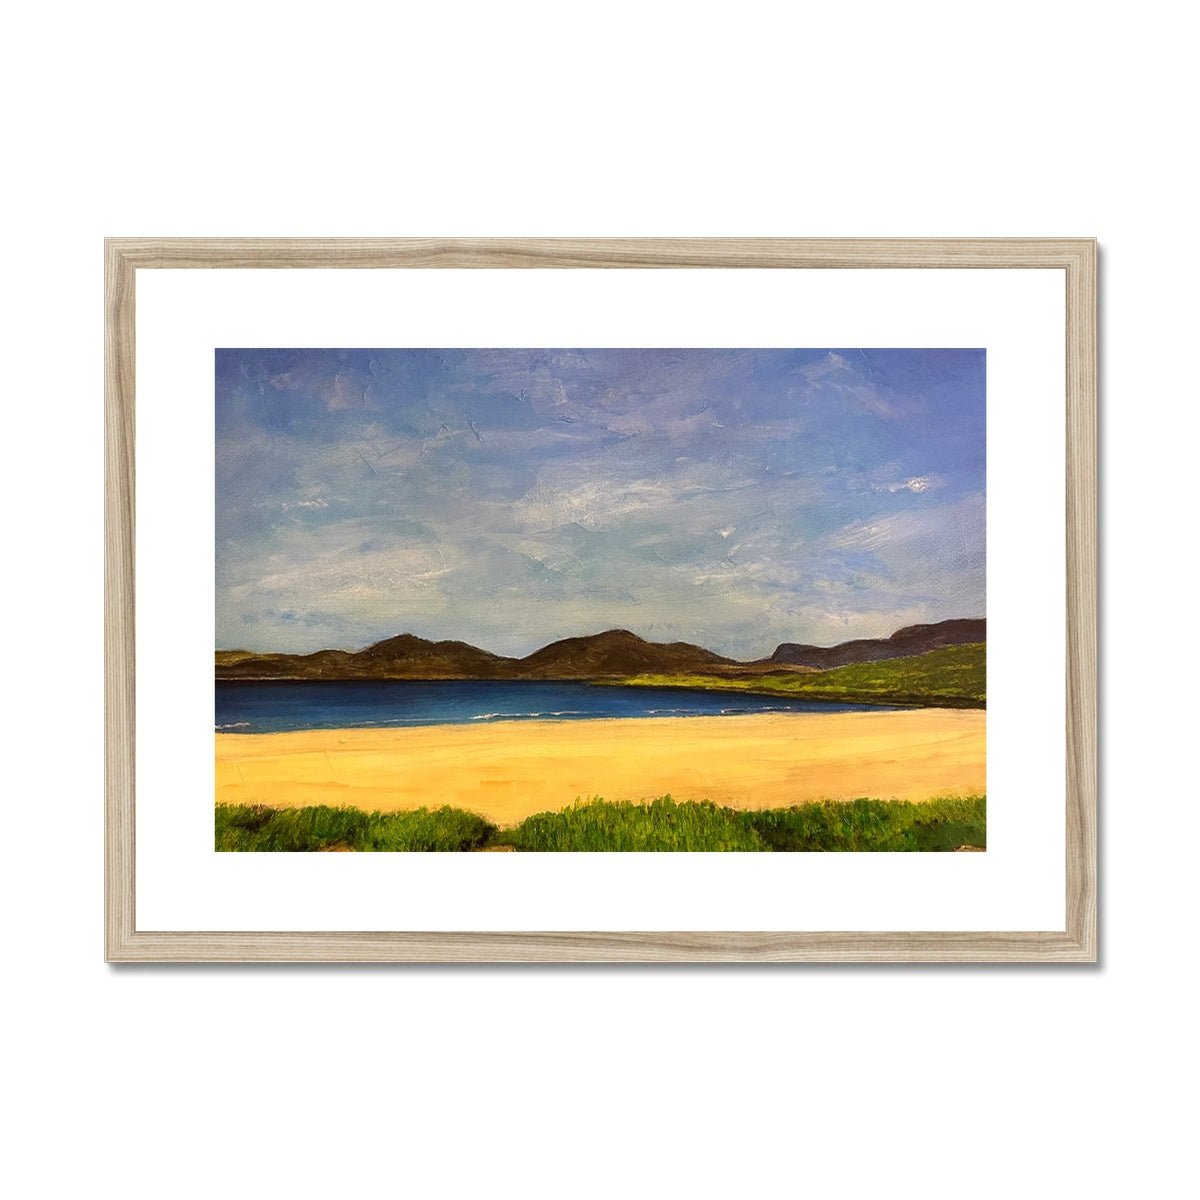 Luskentyre Beach Harris Painting | Framed & Mounted Prints From Scotland-Framed & Mounted Prints-Hebridean Islands Art Gallery-A2 Landscape-Natural Frame-Paintings, Prints, Homeware, Art Gifts From Scotland By Scottish Artist Kevin Hunter